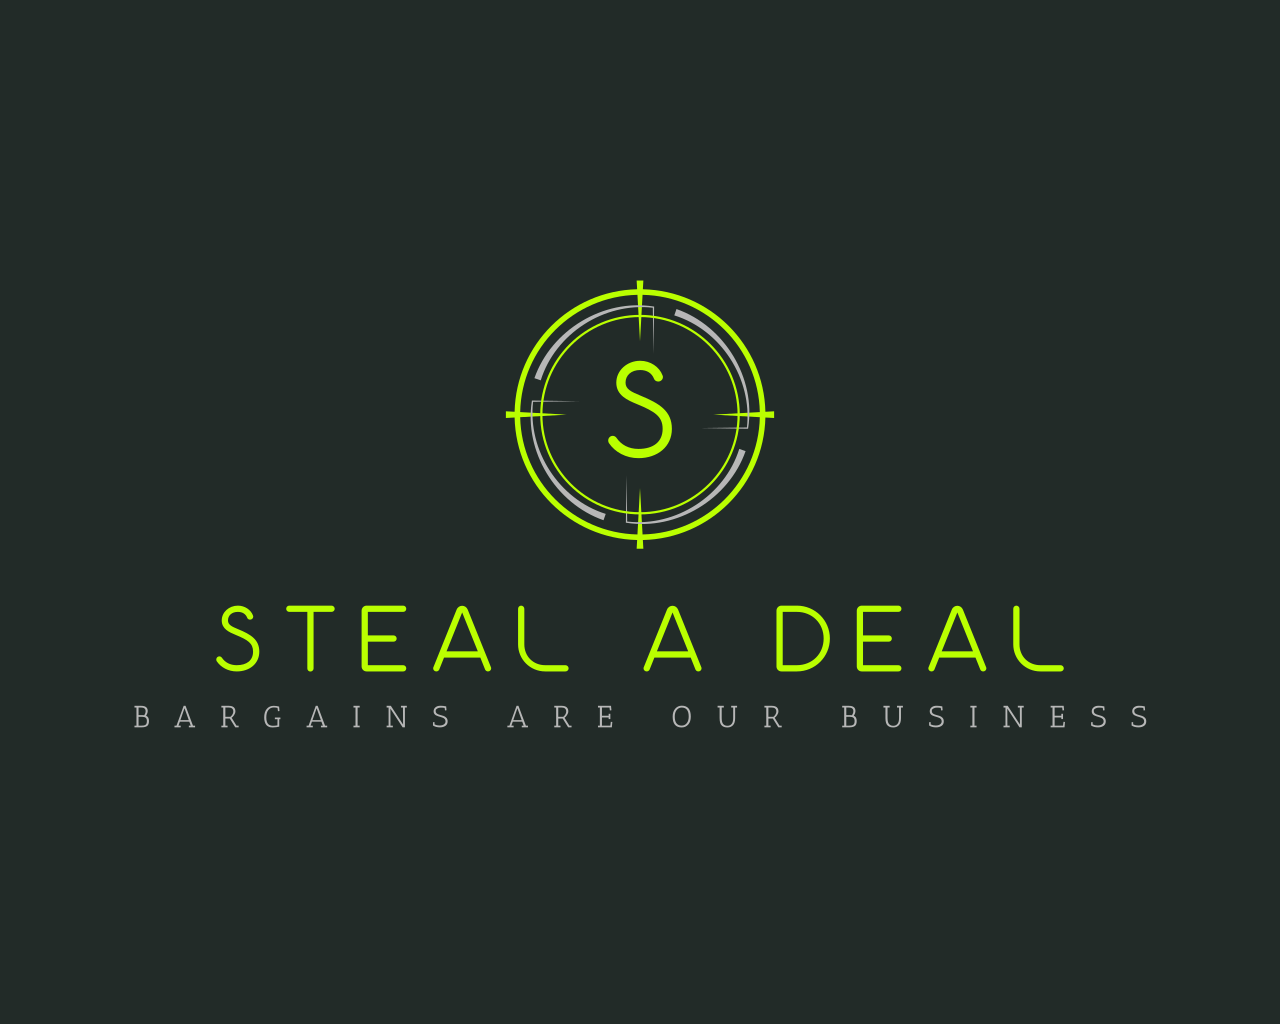 Steal a Deal Warehouse where Bargains are our Business's logo